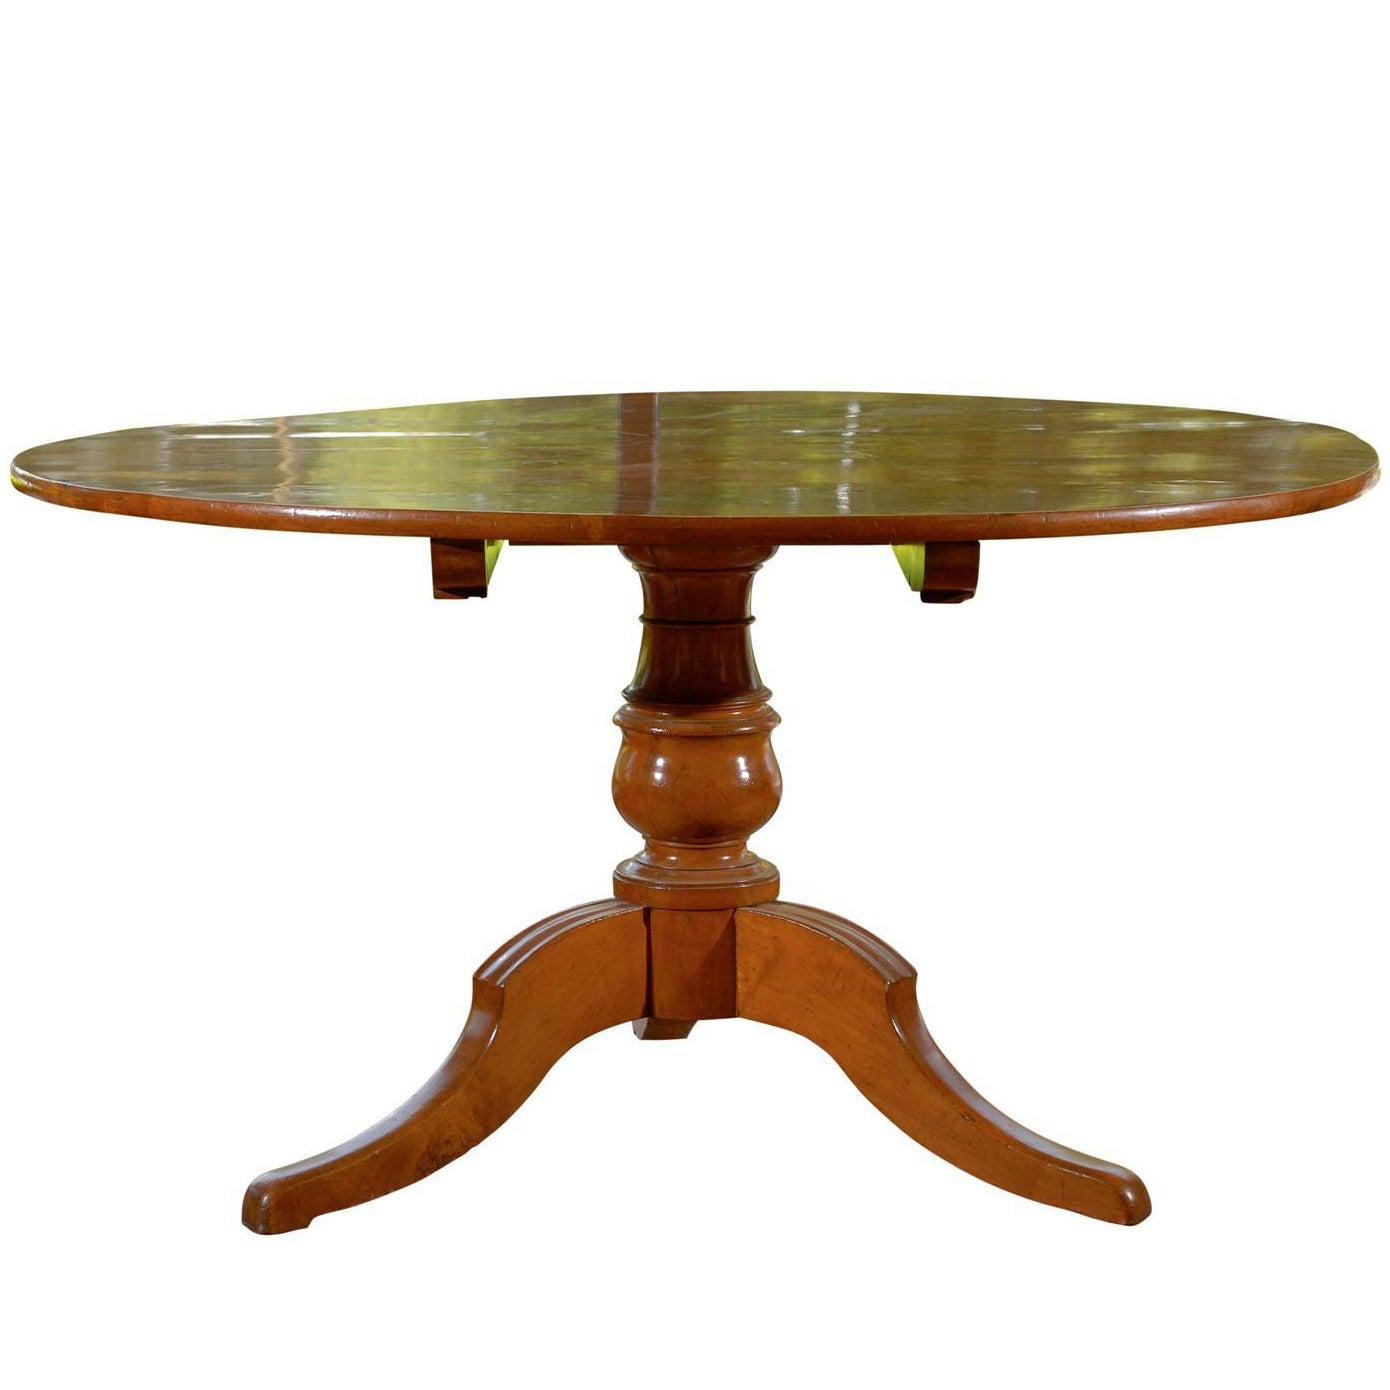 Italian 1850s Fruitwood Round Tilt-Top Dining Table with Pedestal Base